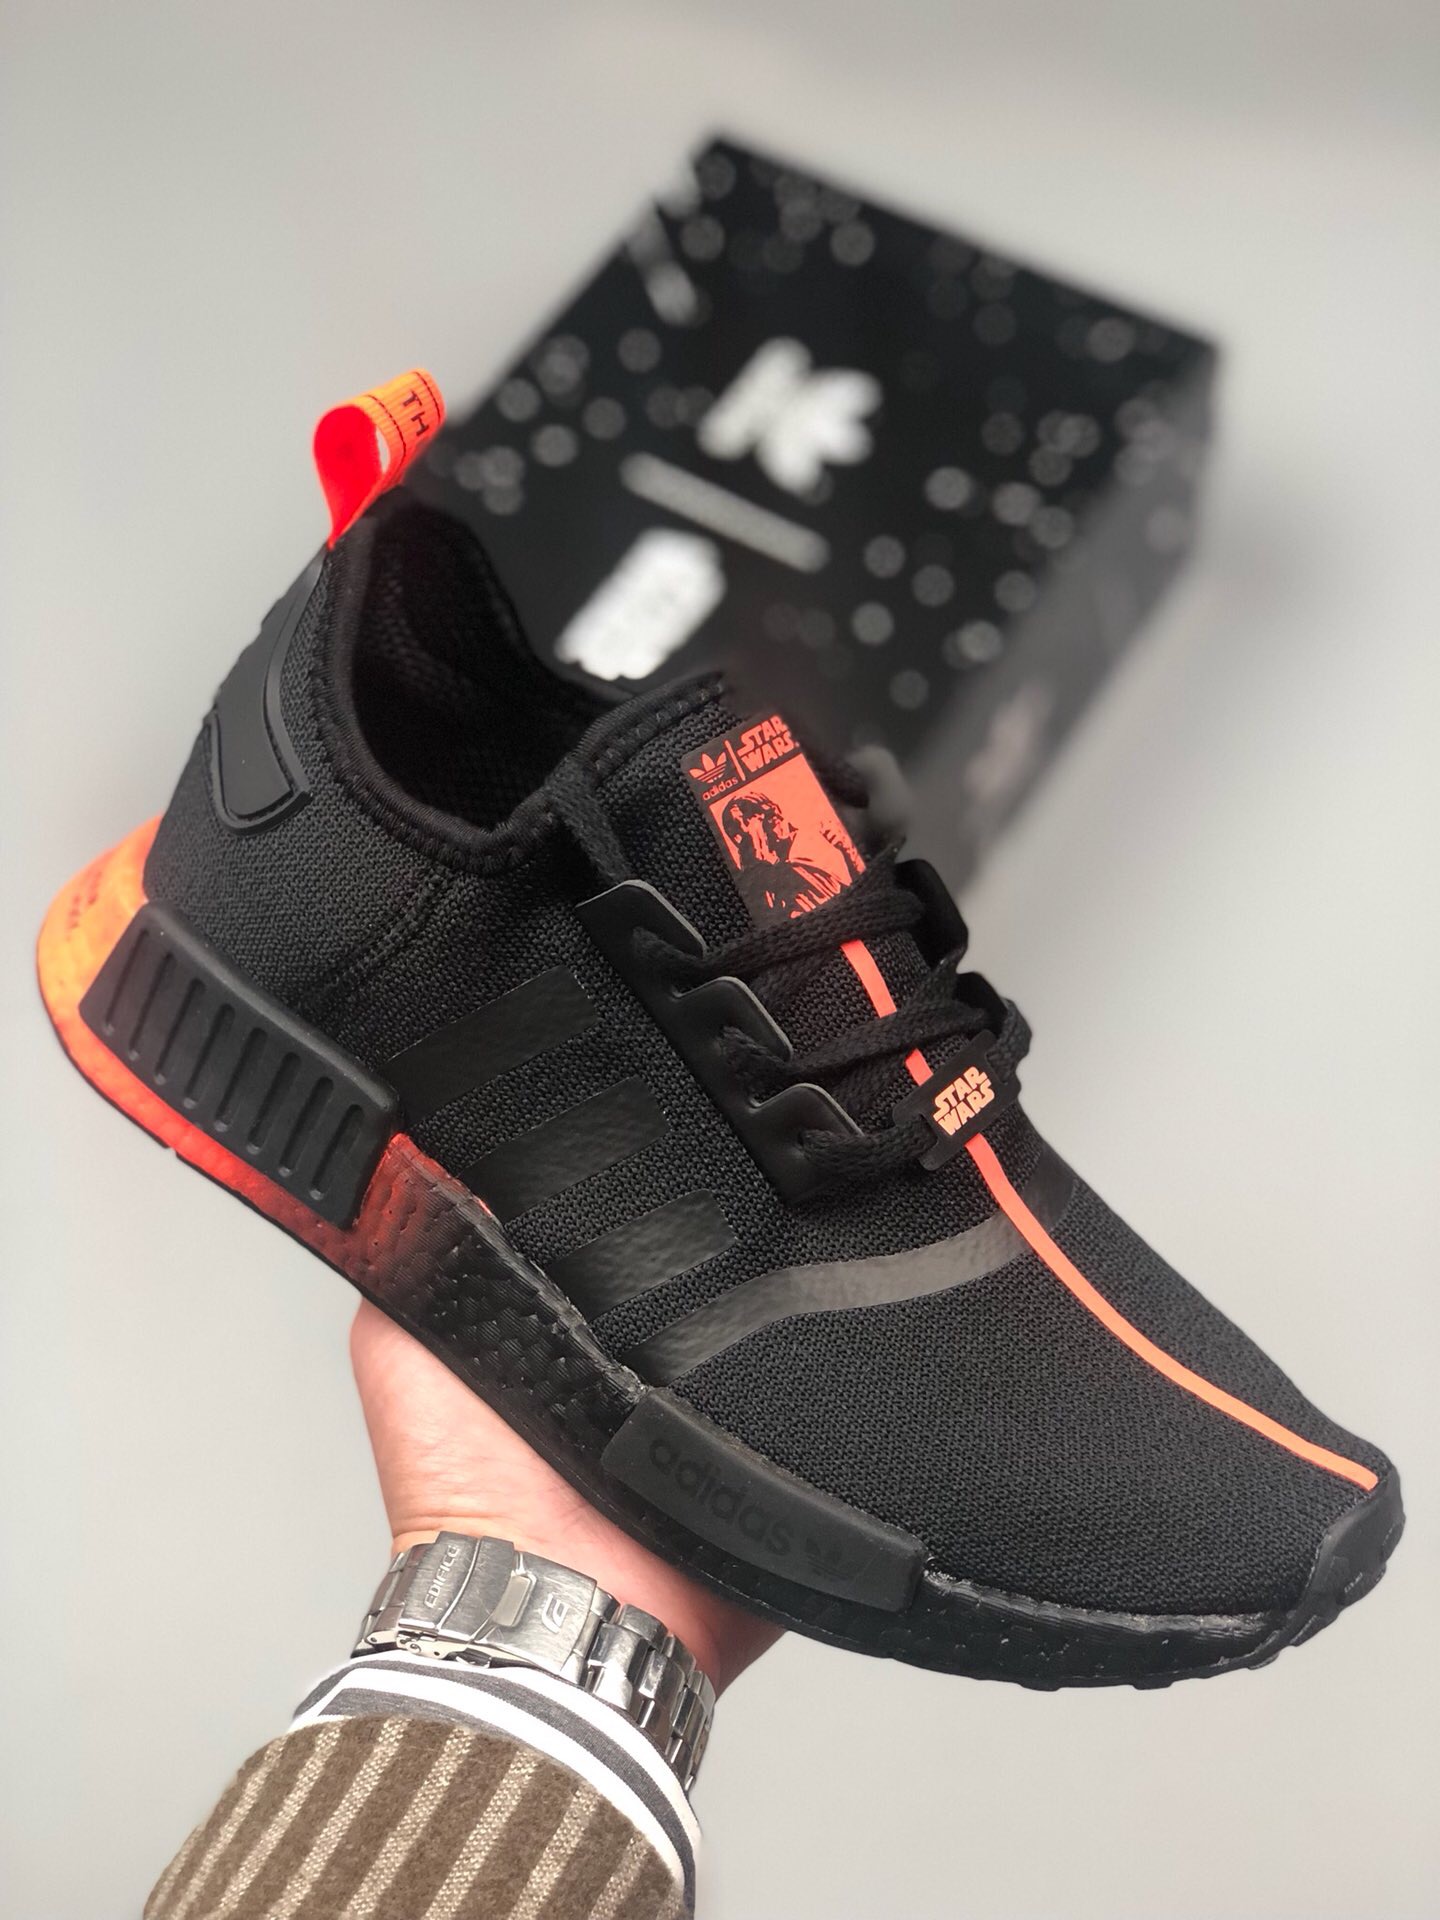 nmd solar red for sale